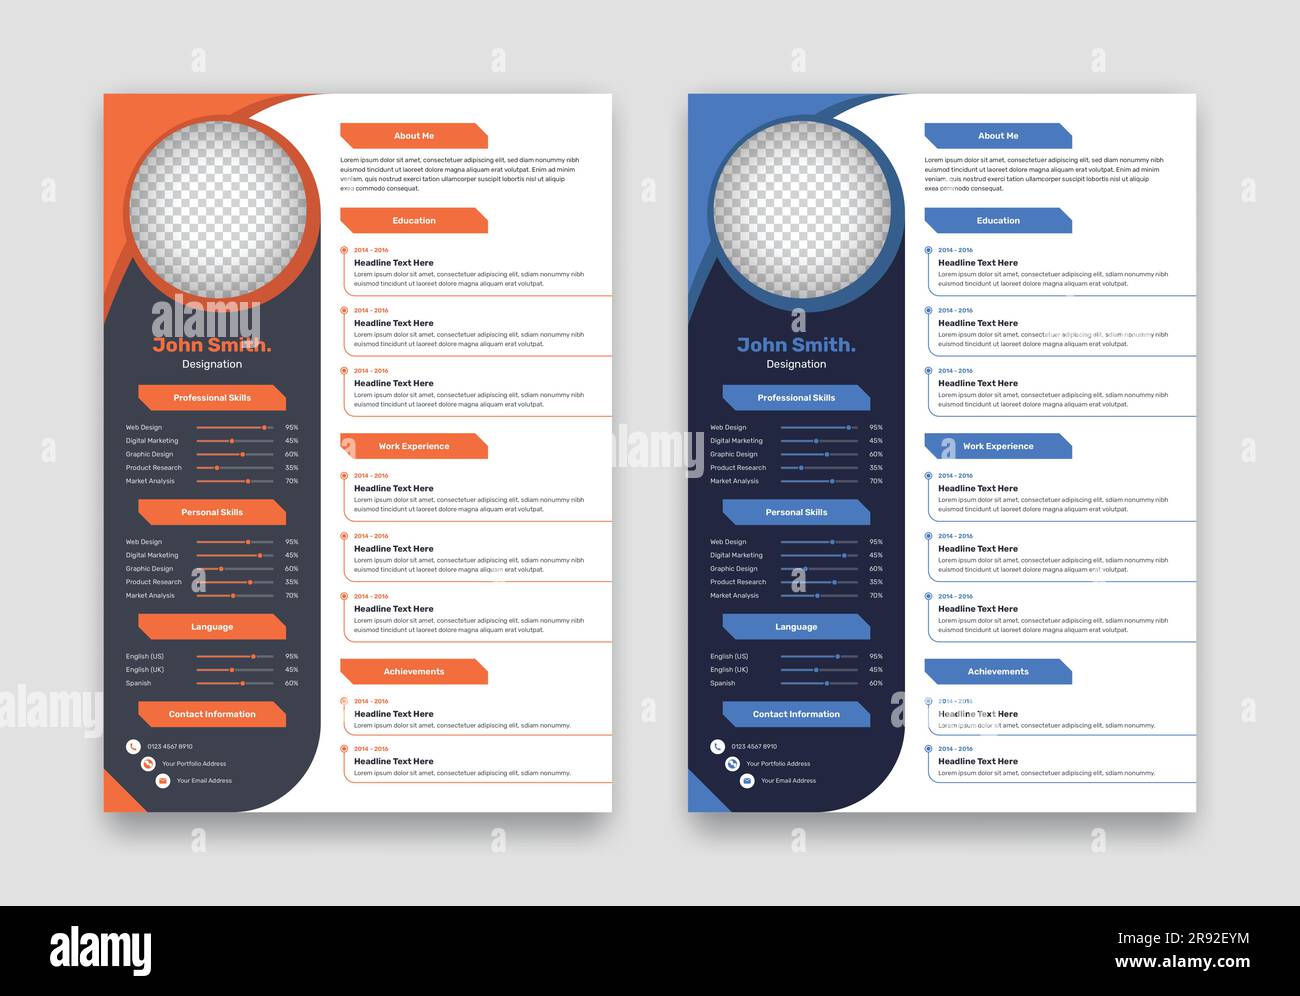 Modern professional cv or resume layout design with two color variations Stock Vector